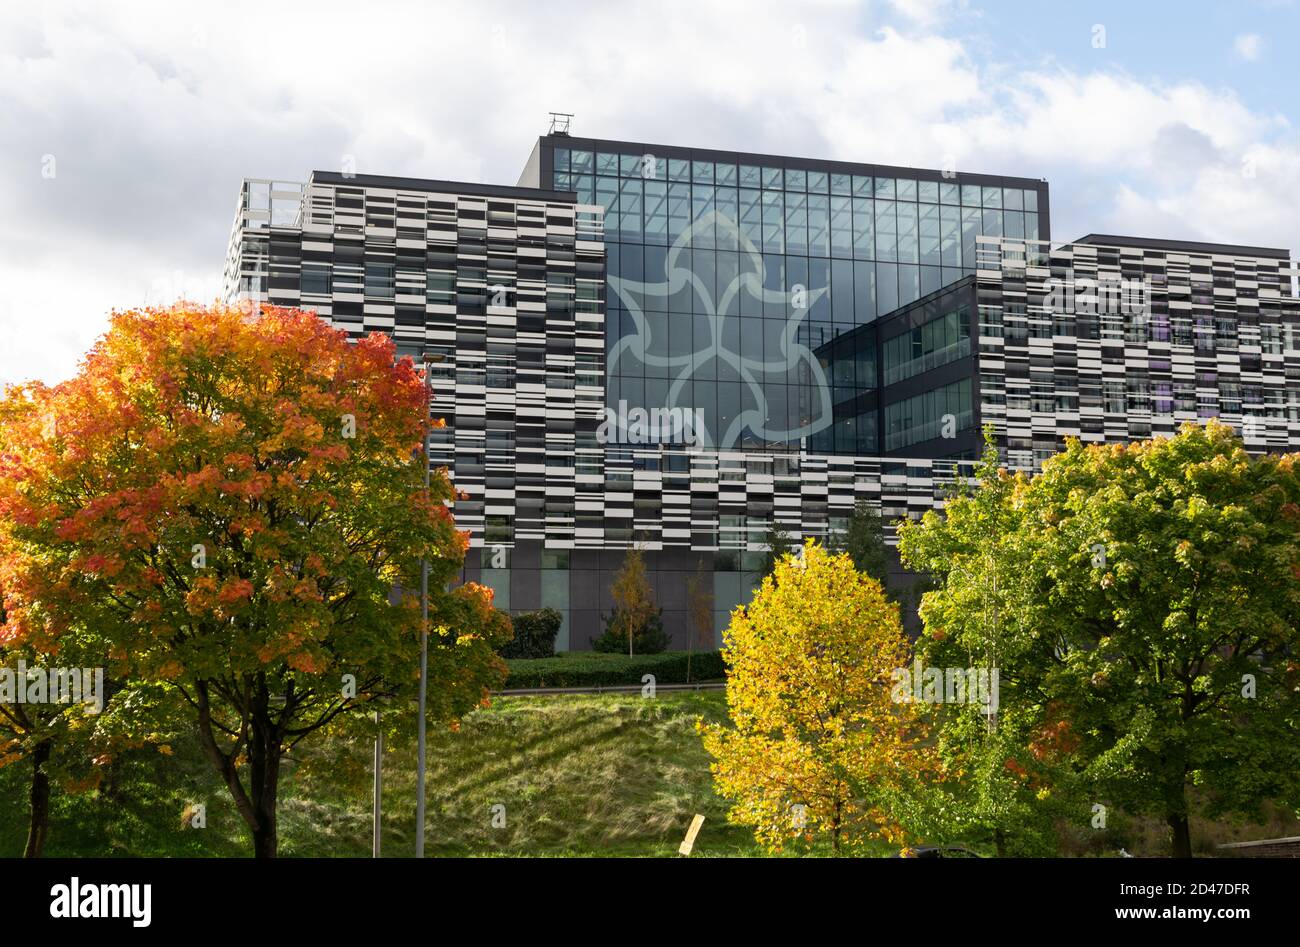 Brooks Building on the Birley Fields campus. Manchester Metropolitan University, UK  logo of six spade irons. Trees with autumn, fall colours. Stock Photo